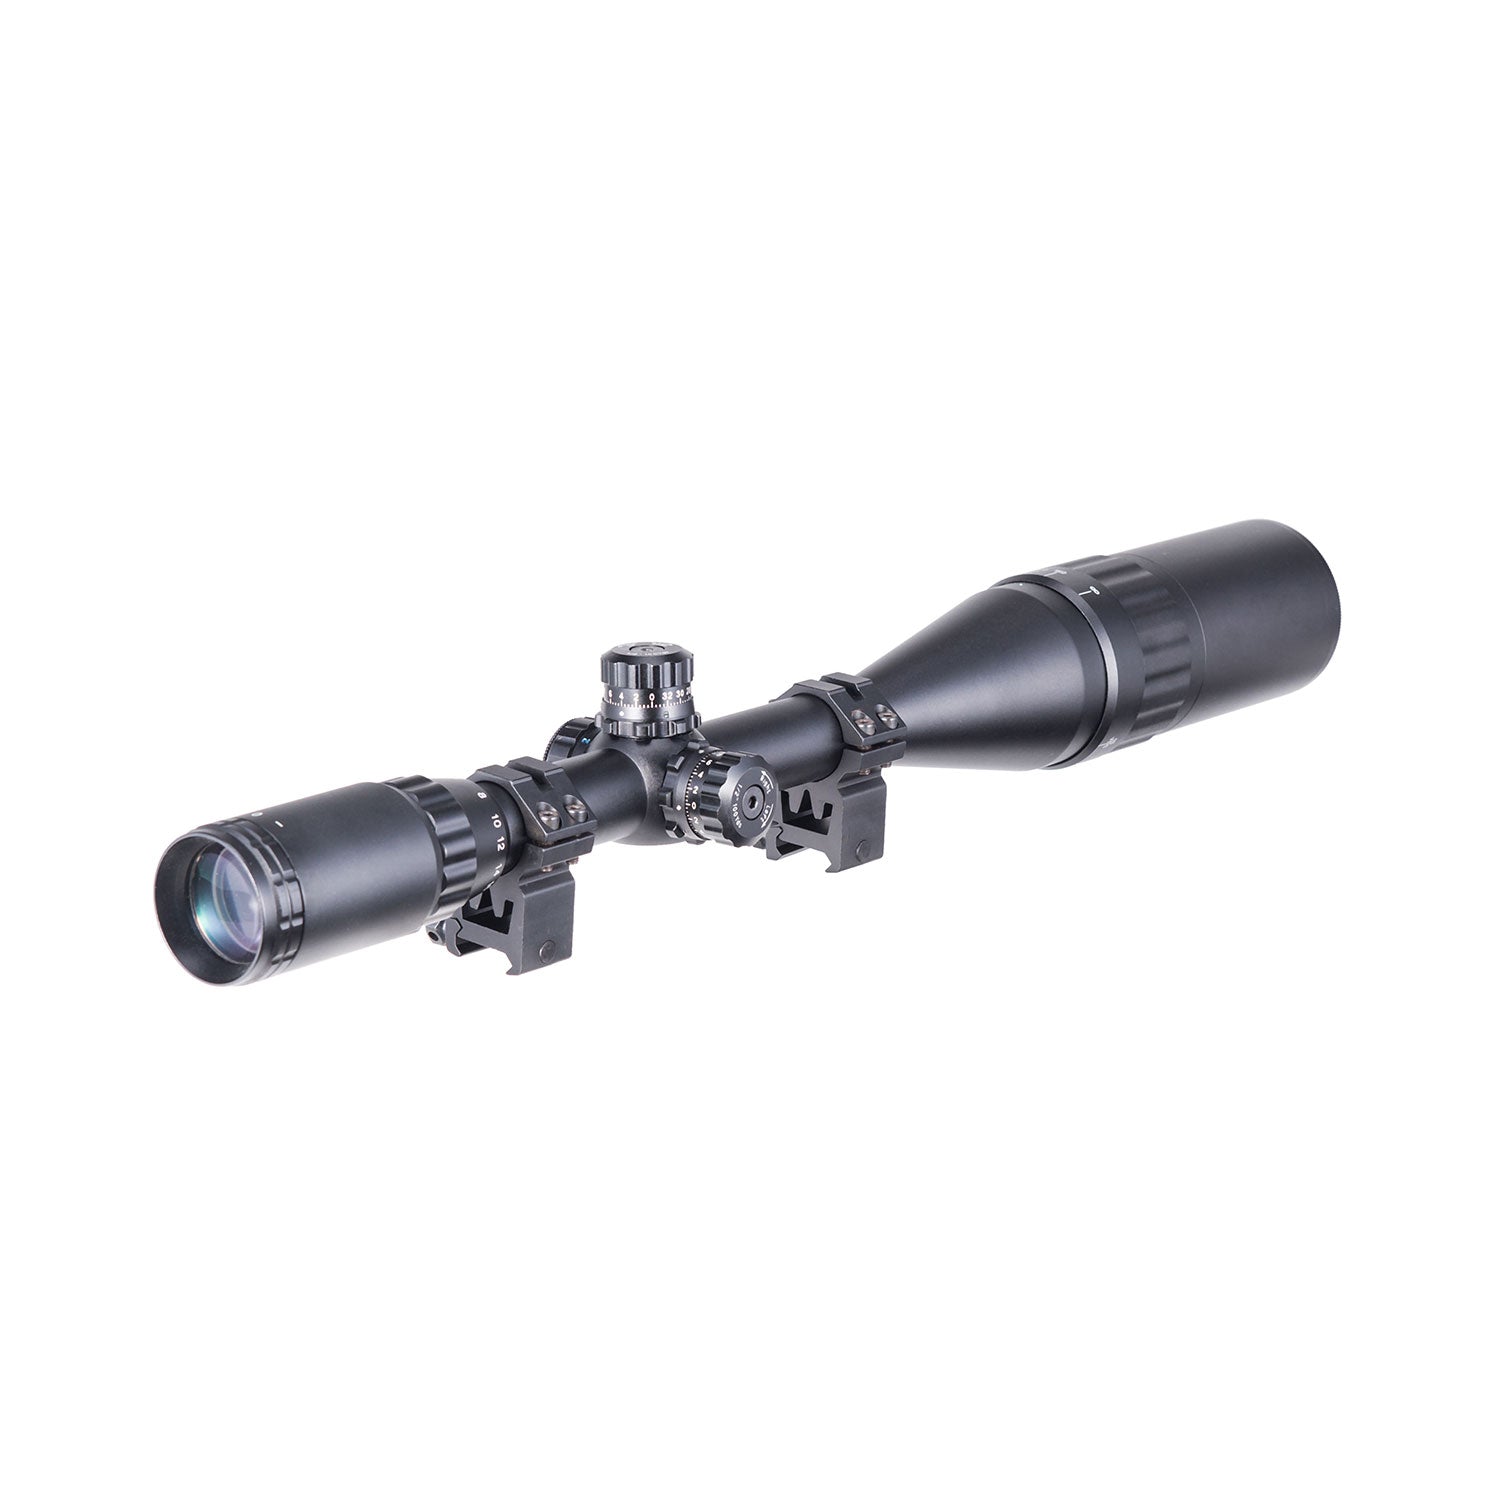 6-24x50 AO Illuminated Mil-dot Rifle Scope with Sunshade Tube, Flip-up Cap and Ring Mount High-profile Picatinny Rings